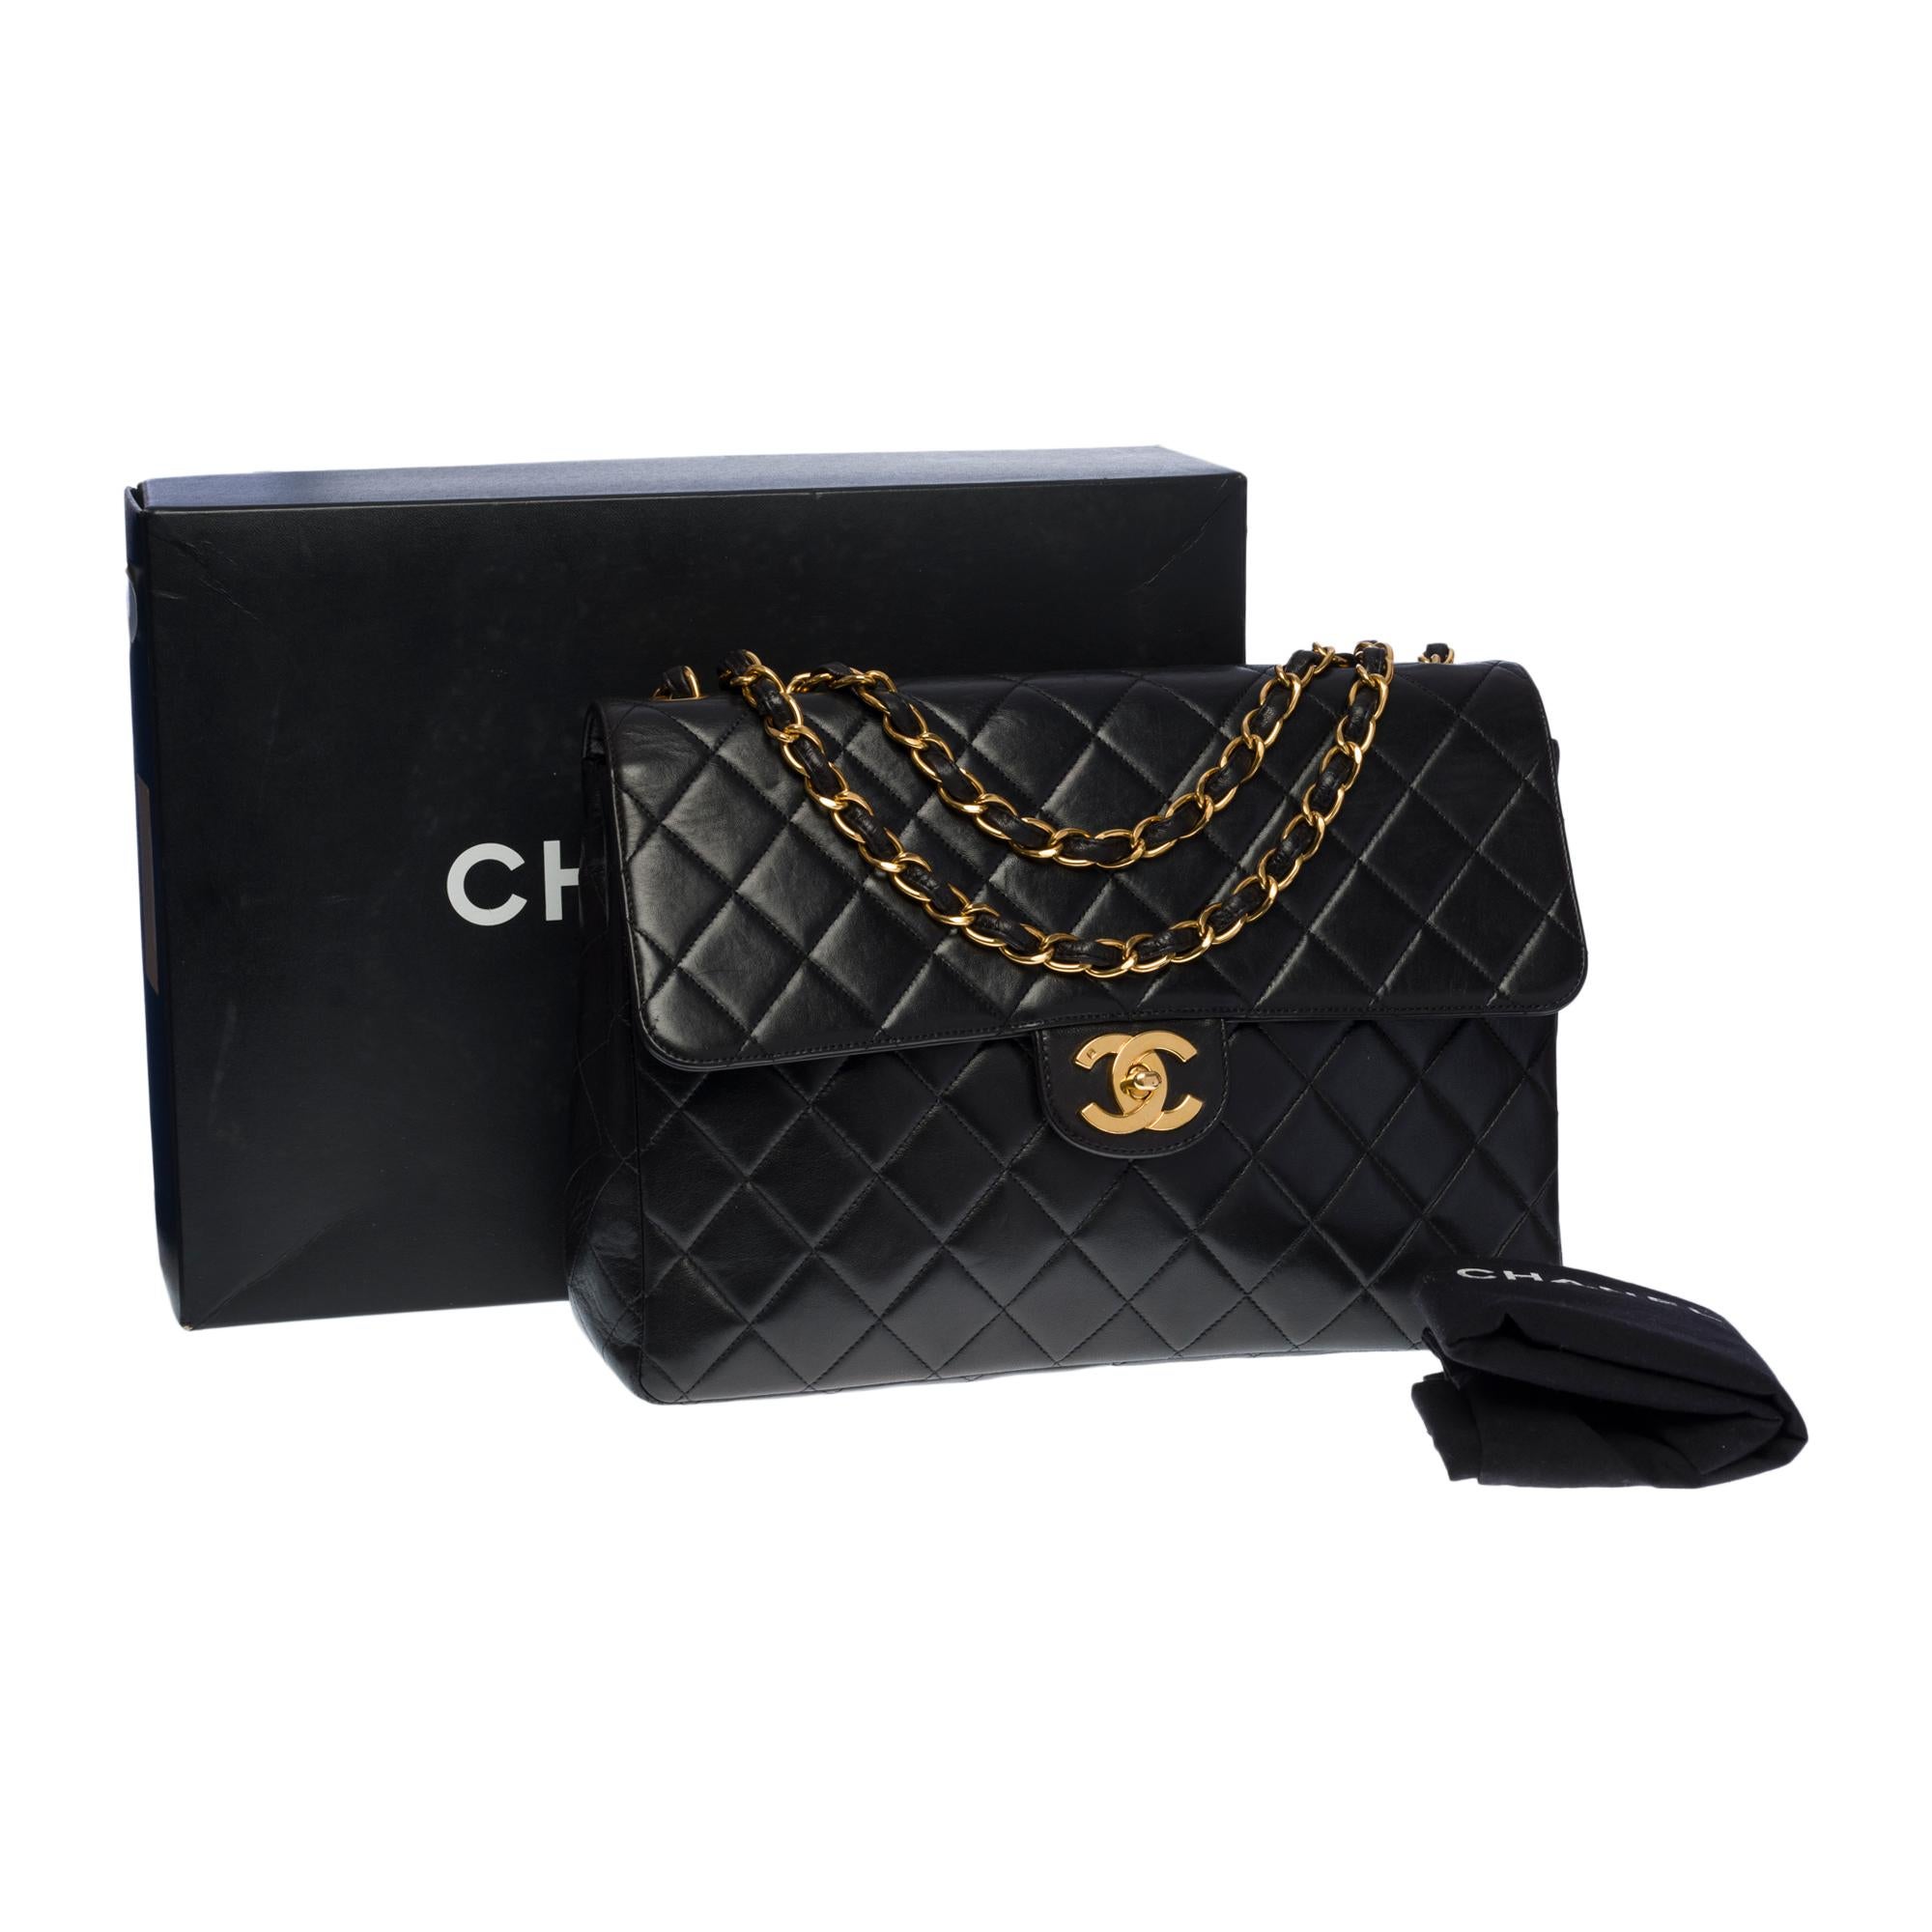 Chanel Timeless Jumbo single flap shoulder bag in black quilted lambskin, GHW For Sale 5